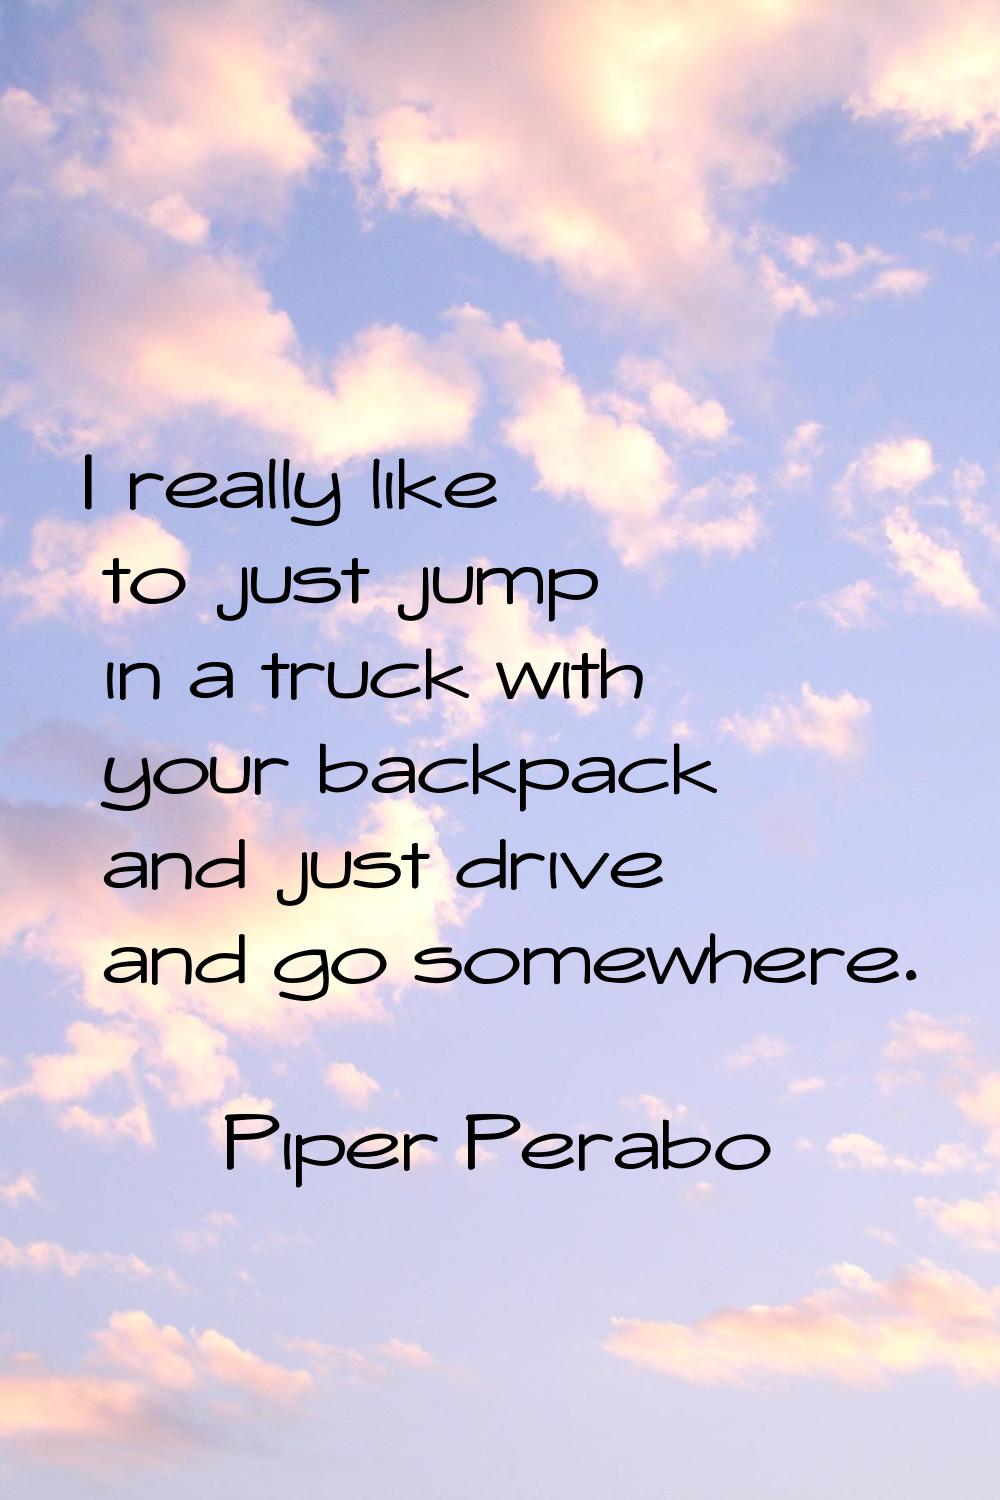 I really like to just jump in a truck with your backpack and just drive and go somewhere.